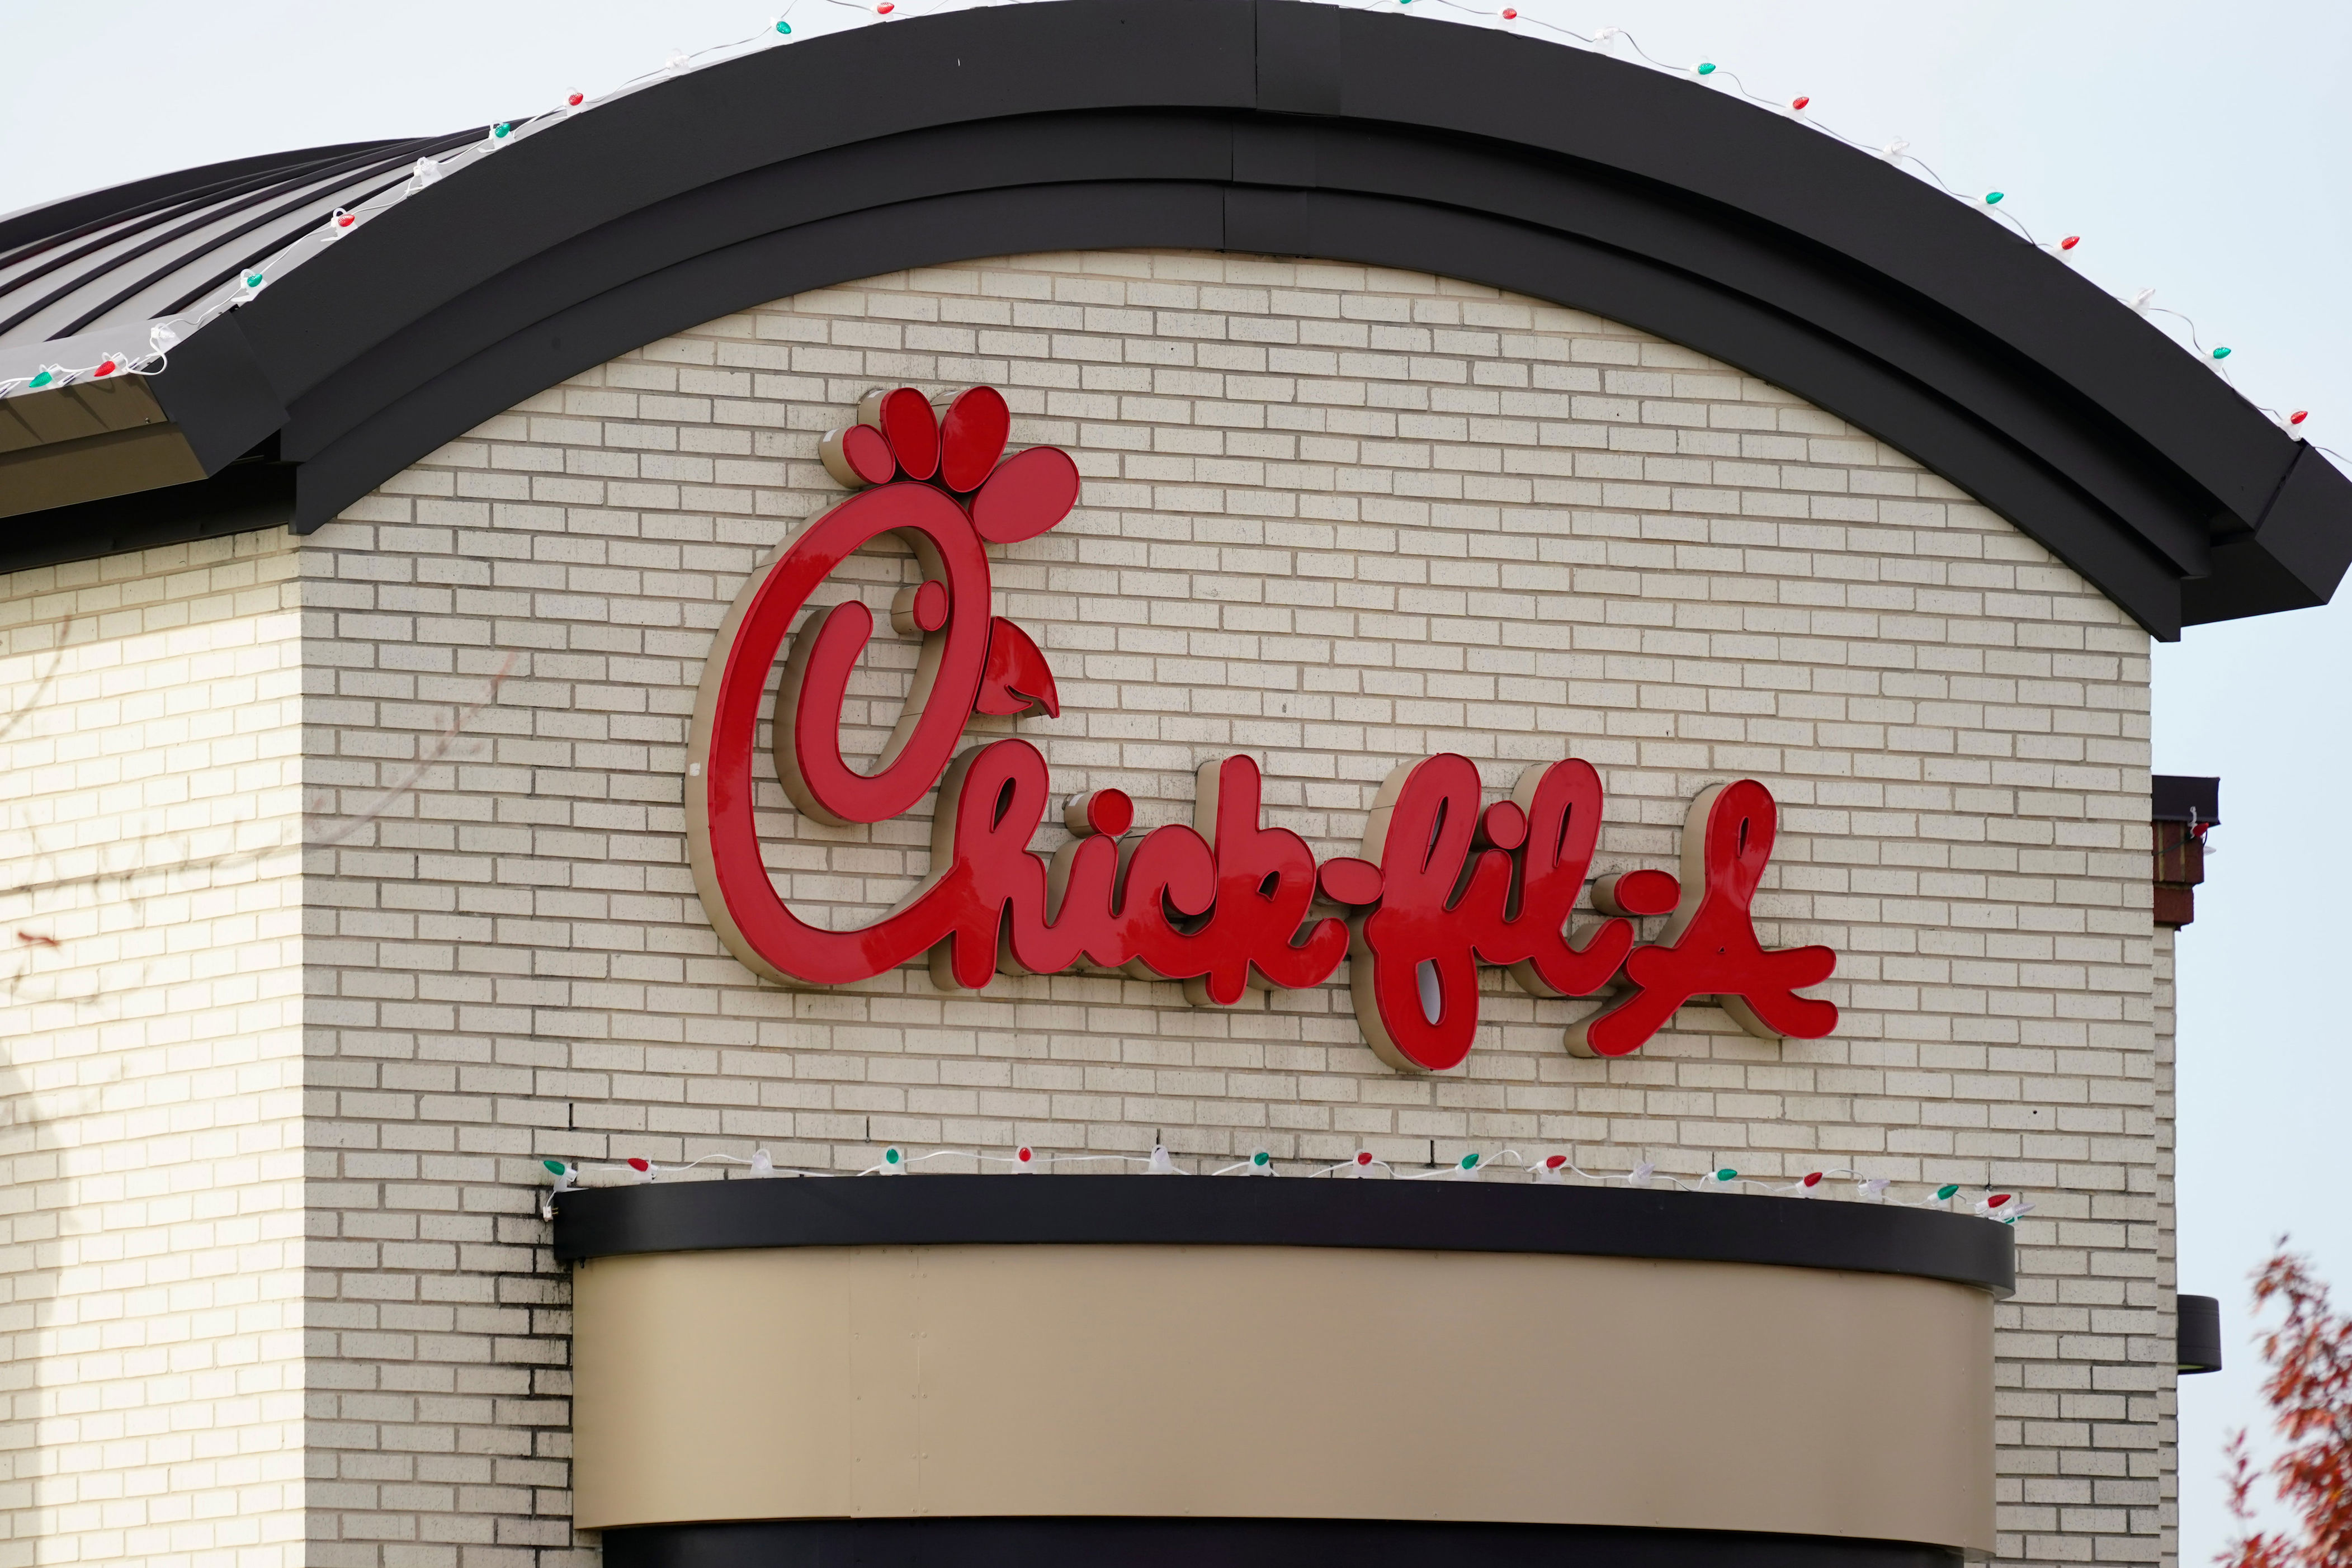 mcdonald’s, chick-fil-a and other fast food chains are raising prices after state raises minimum wage